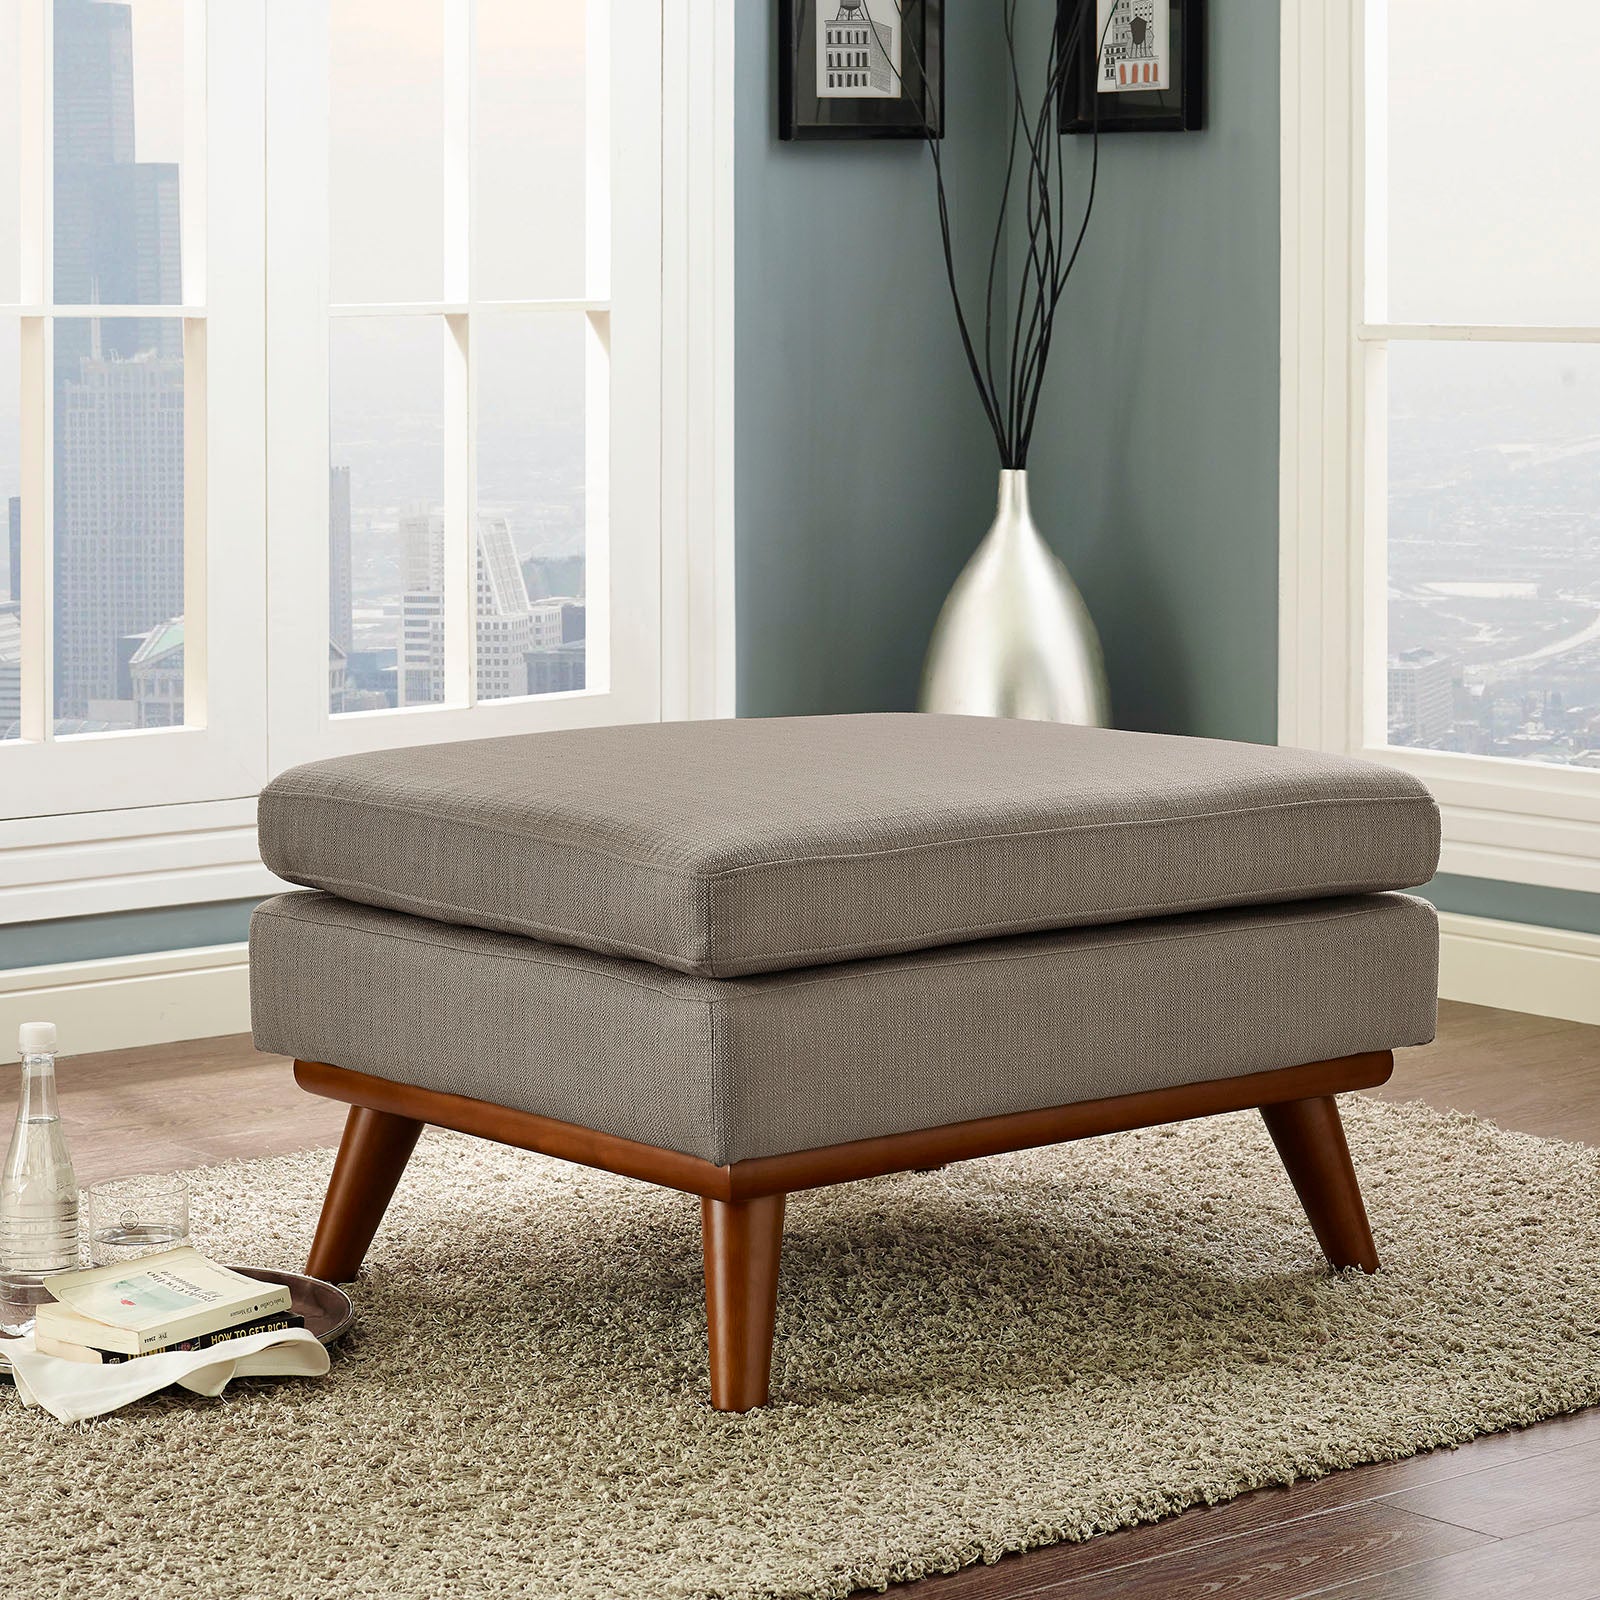 Modway Ottomans & Stools - Engage Upholstered Fabric Ottoman Granite